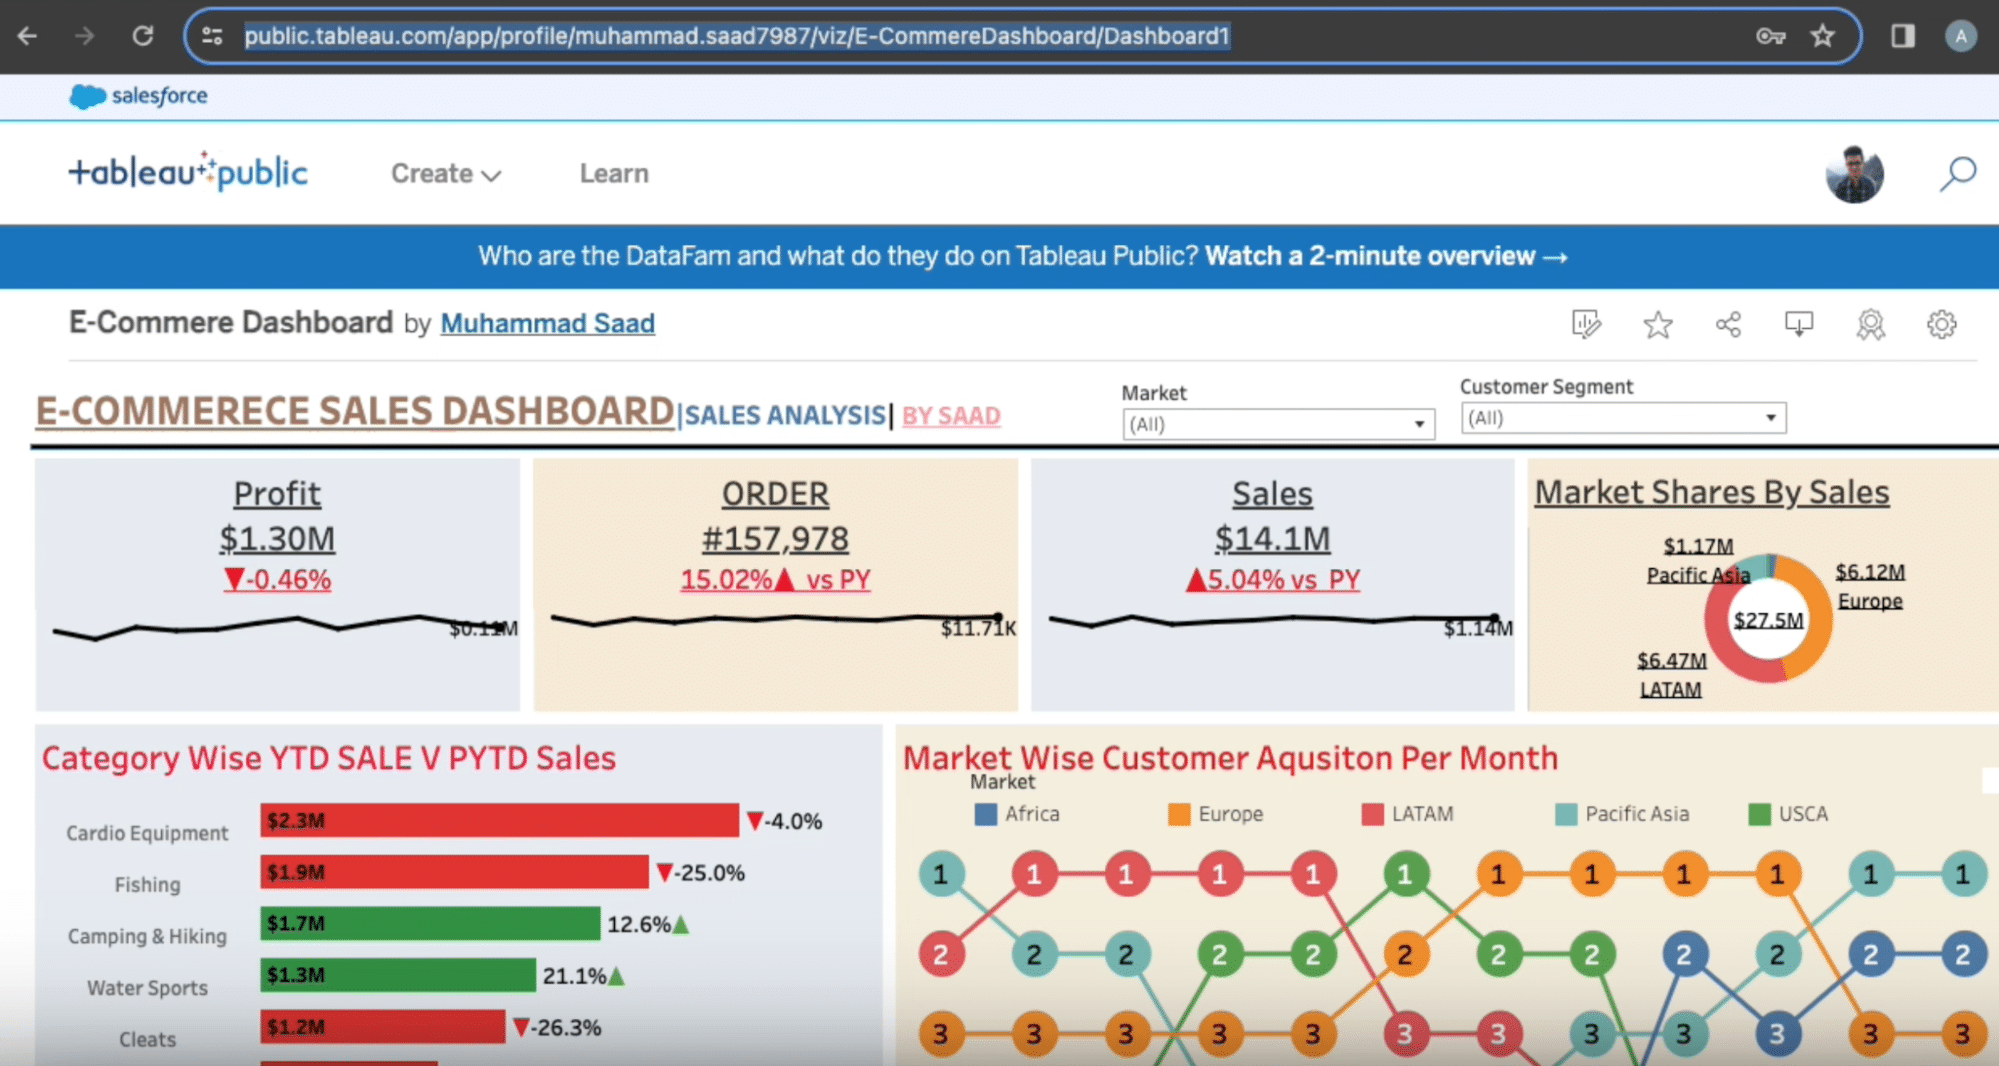 After publication on Tableau Public, sharing the dashboard through a link for wide access.